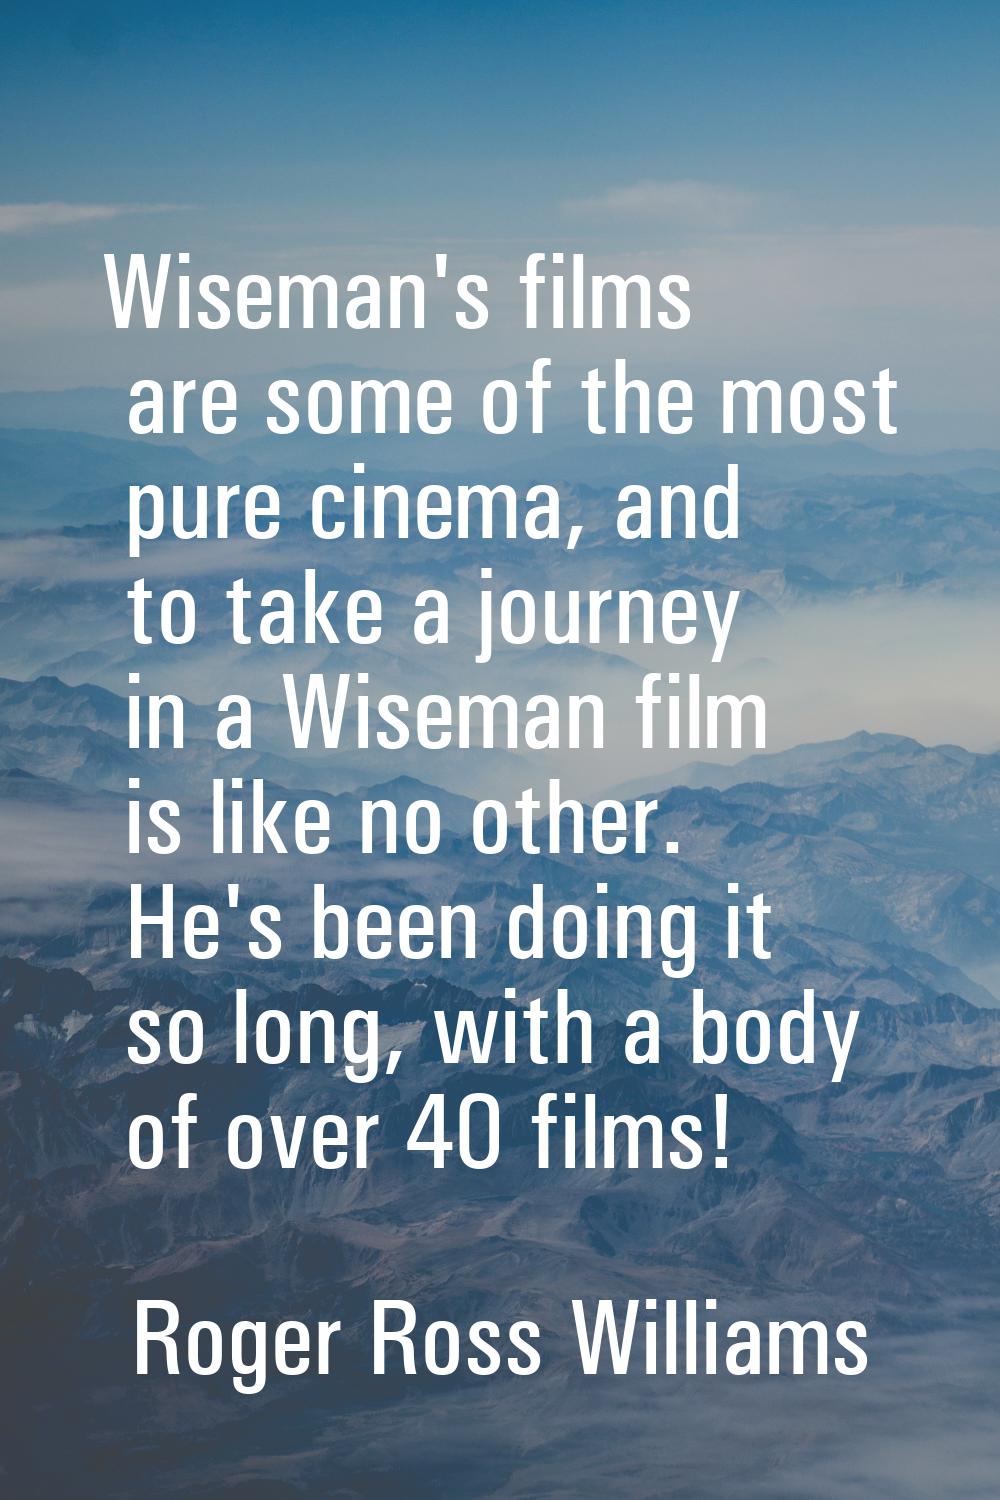 Wiseman's films are some of the most pure cinema, and to take a journey in a Wiseman film is like n